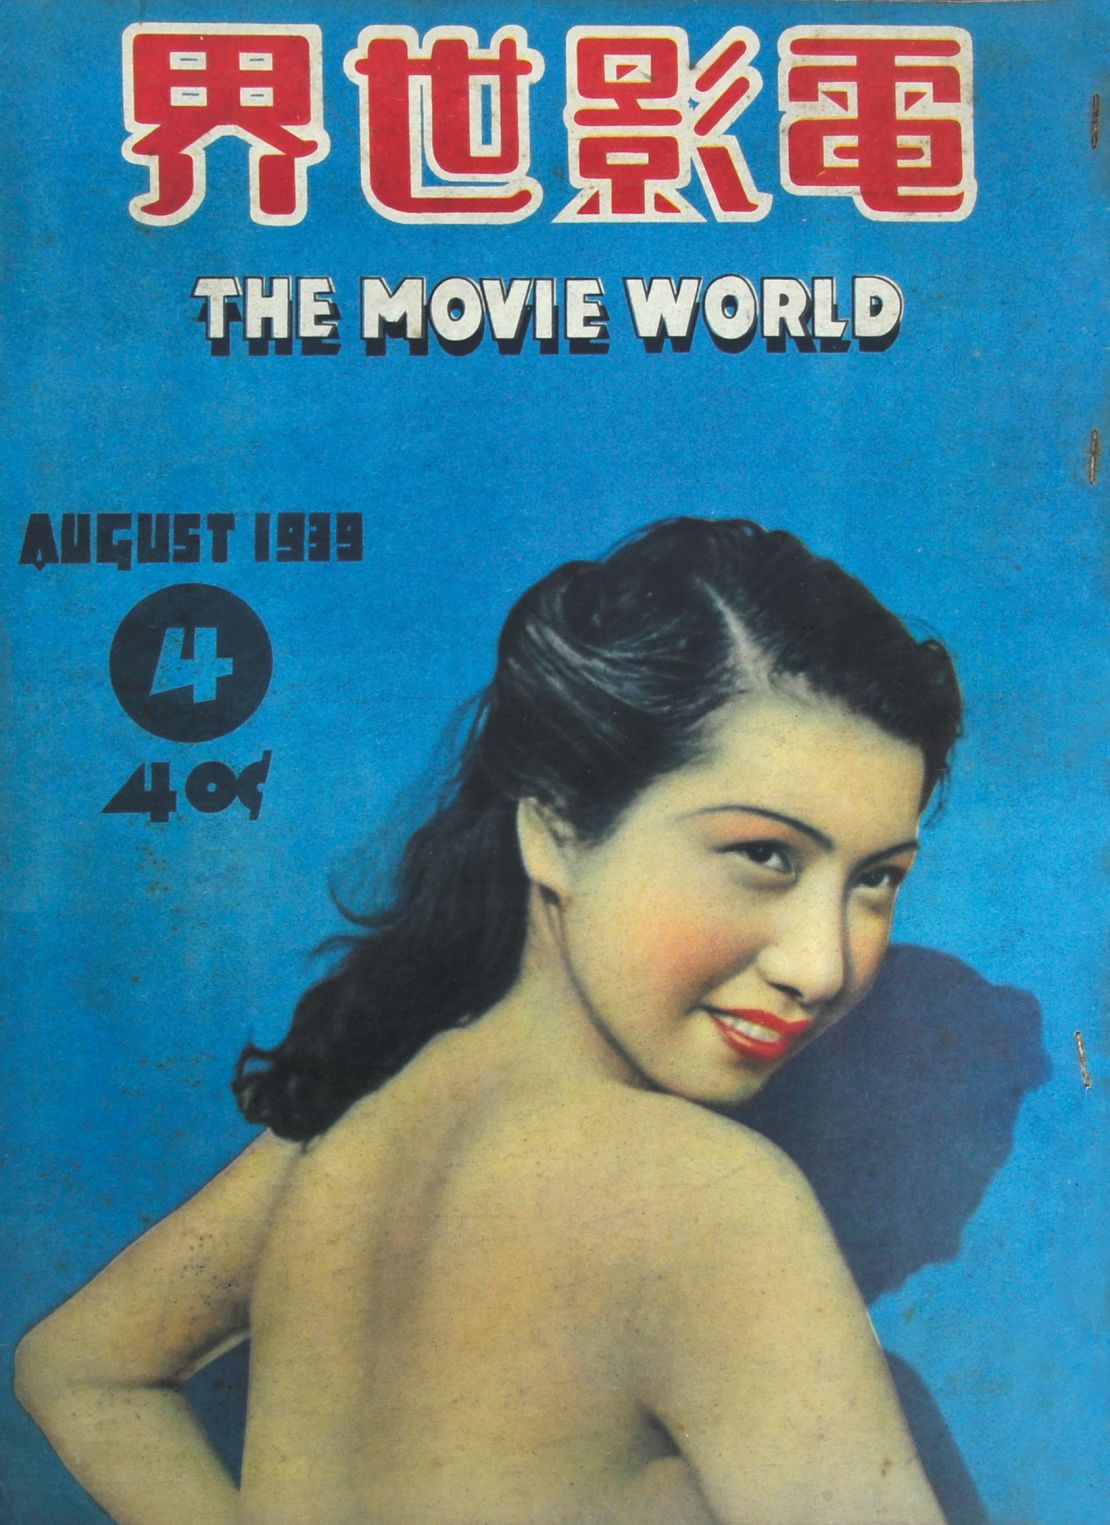 Actress Lu Luming features on the cover of a 1939 issue of The Movie World.